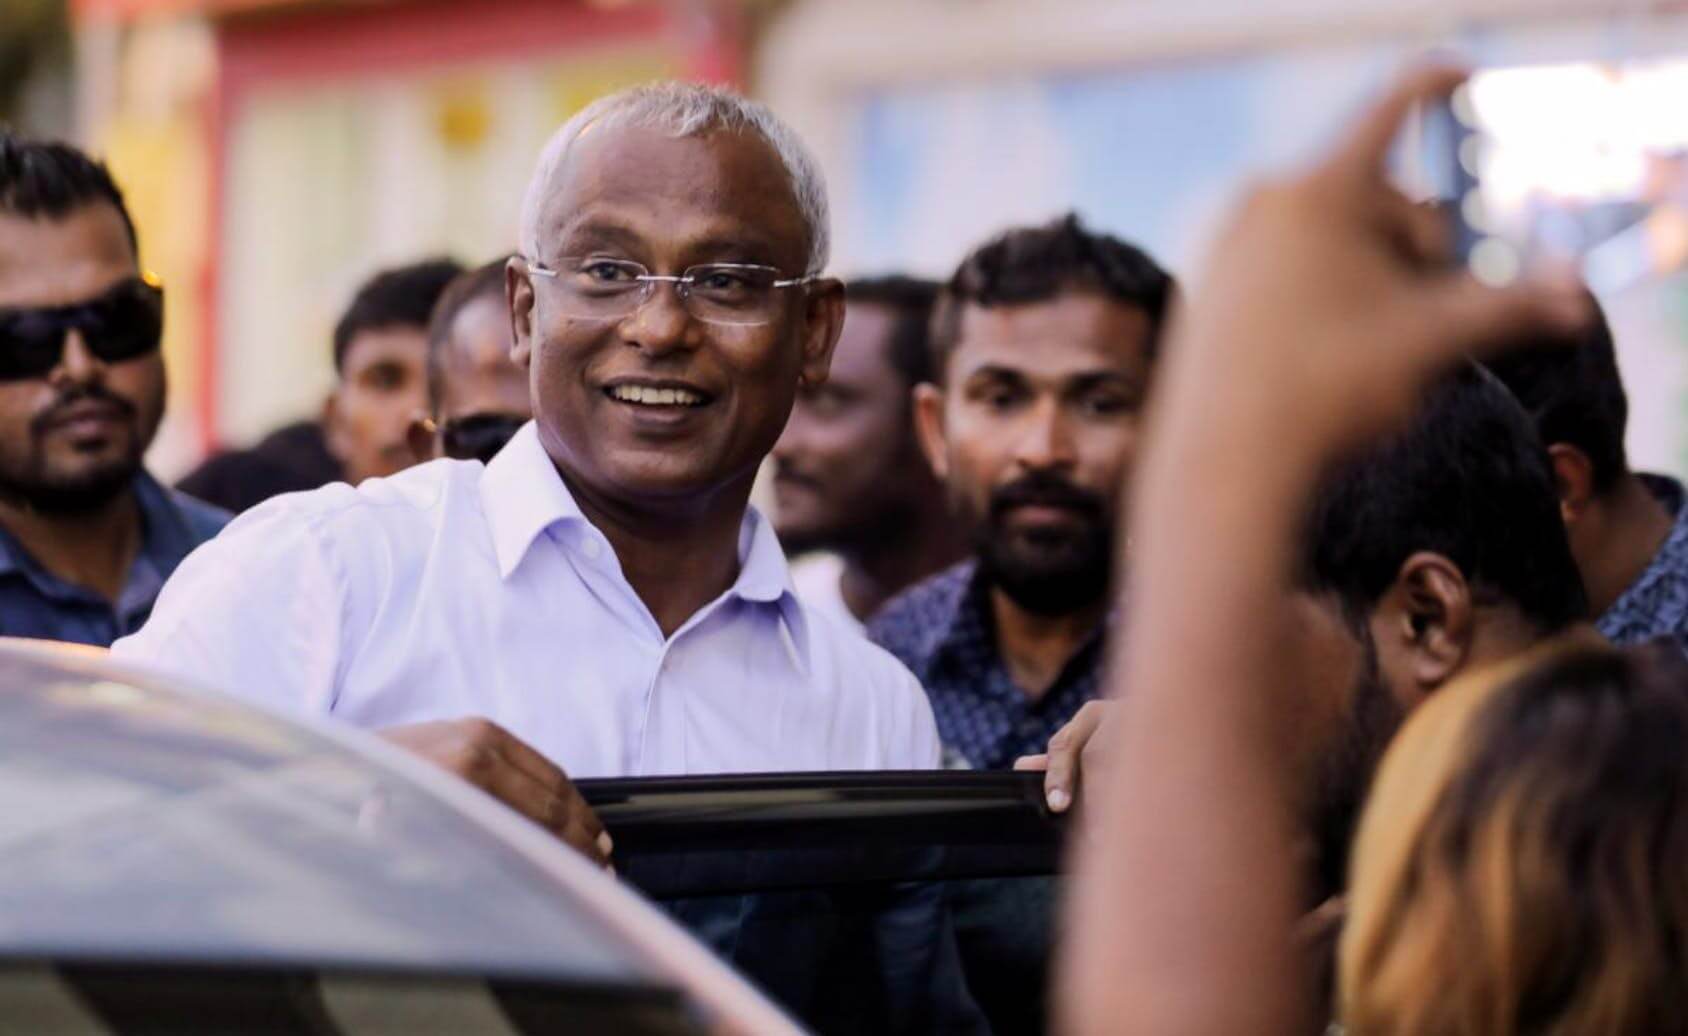 Maldives: Opposition Candidate Wins Election, Ending Yameen’s Authoritarian Rule